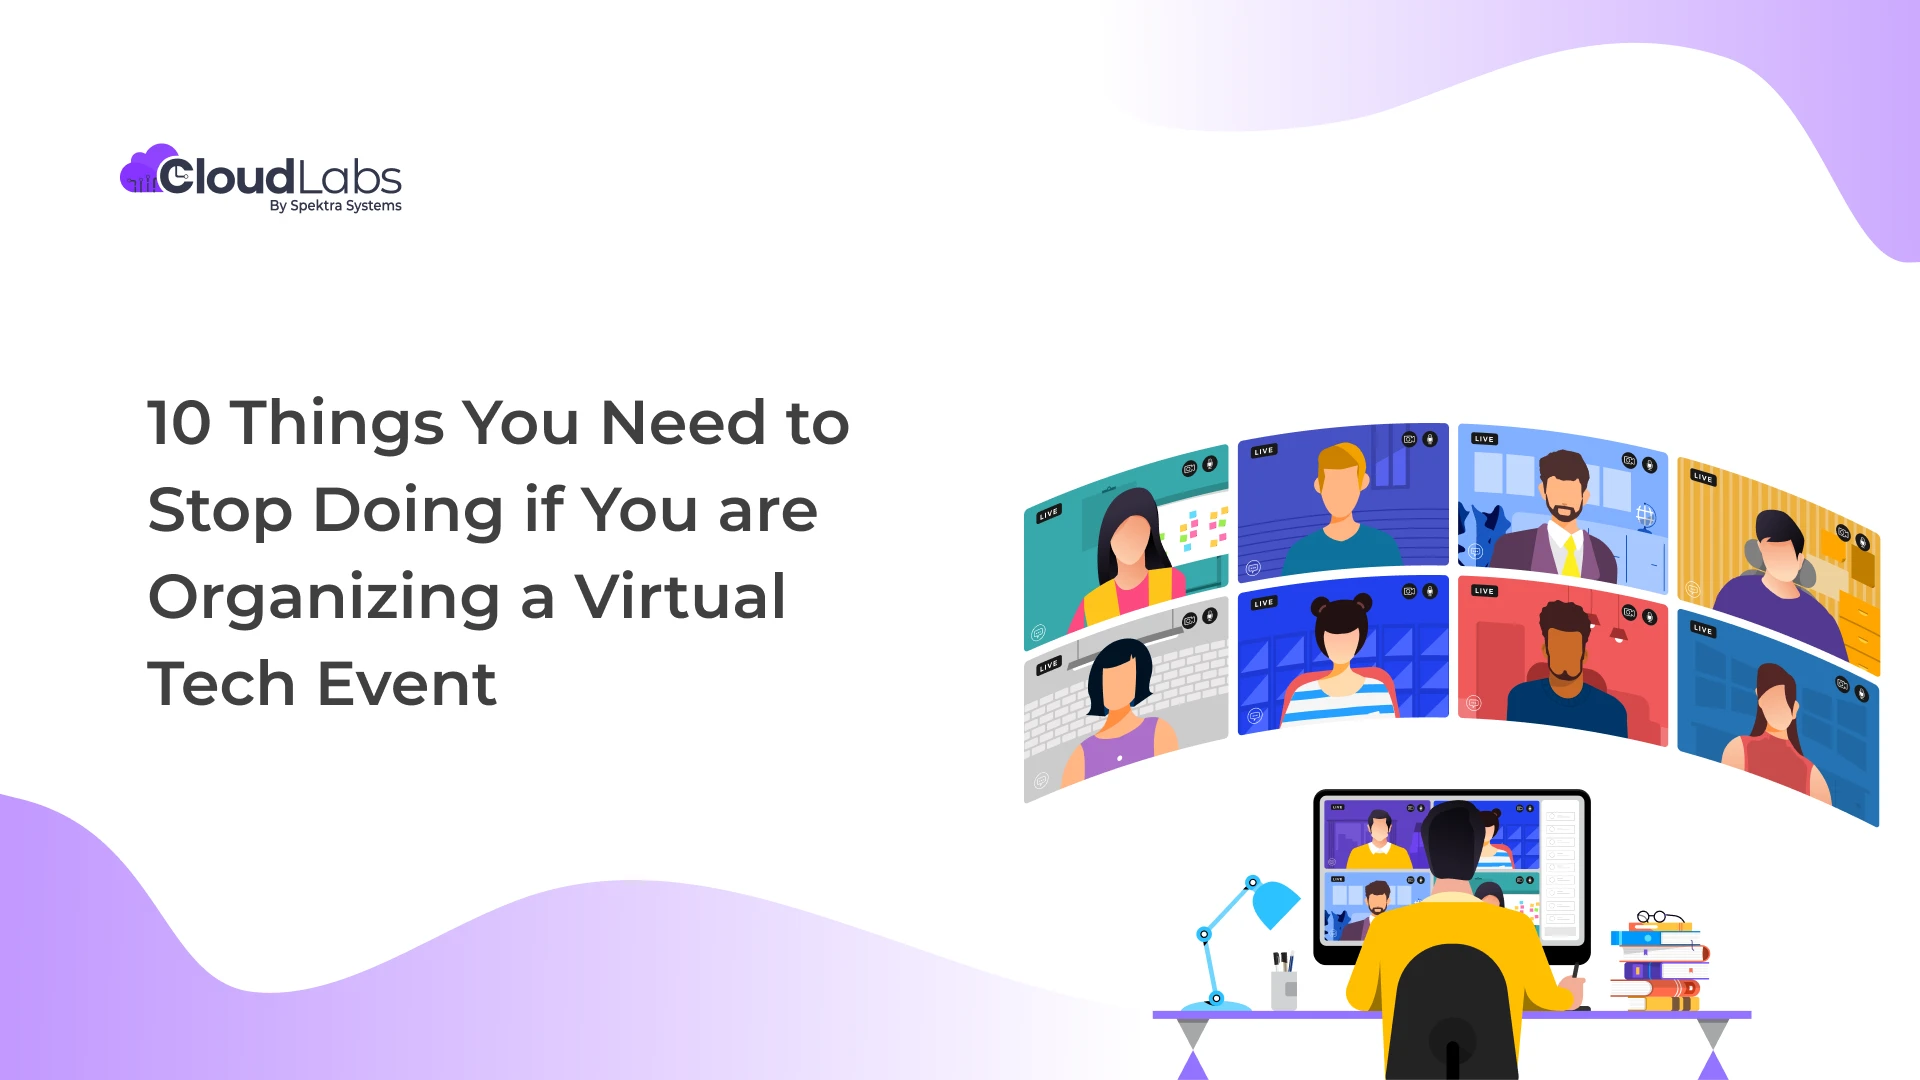 10 Things You Need to Stop Doing if You are Organizing a Virtual Tech Event